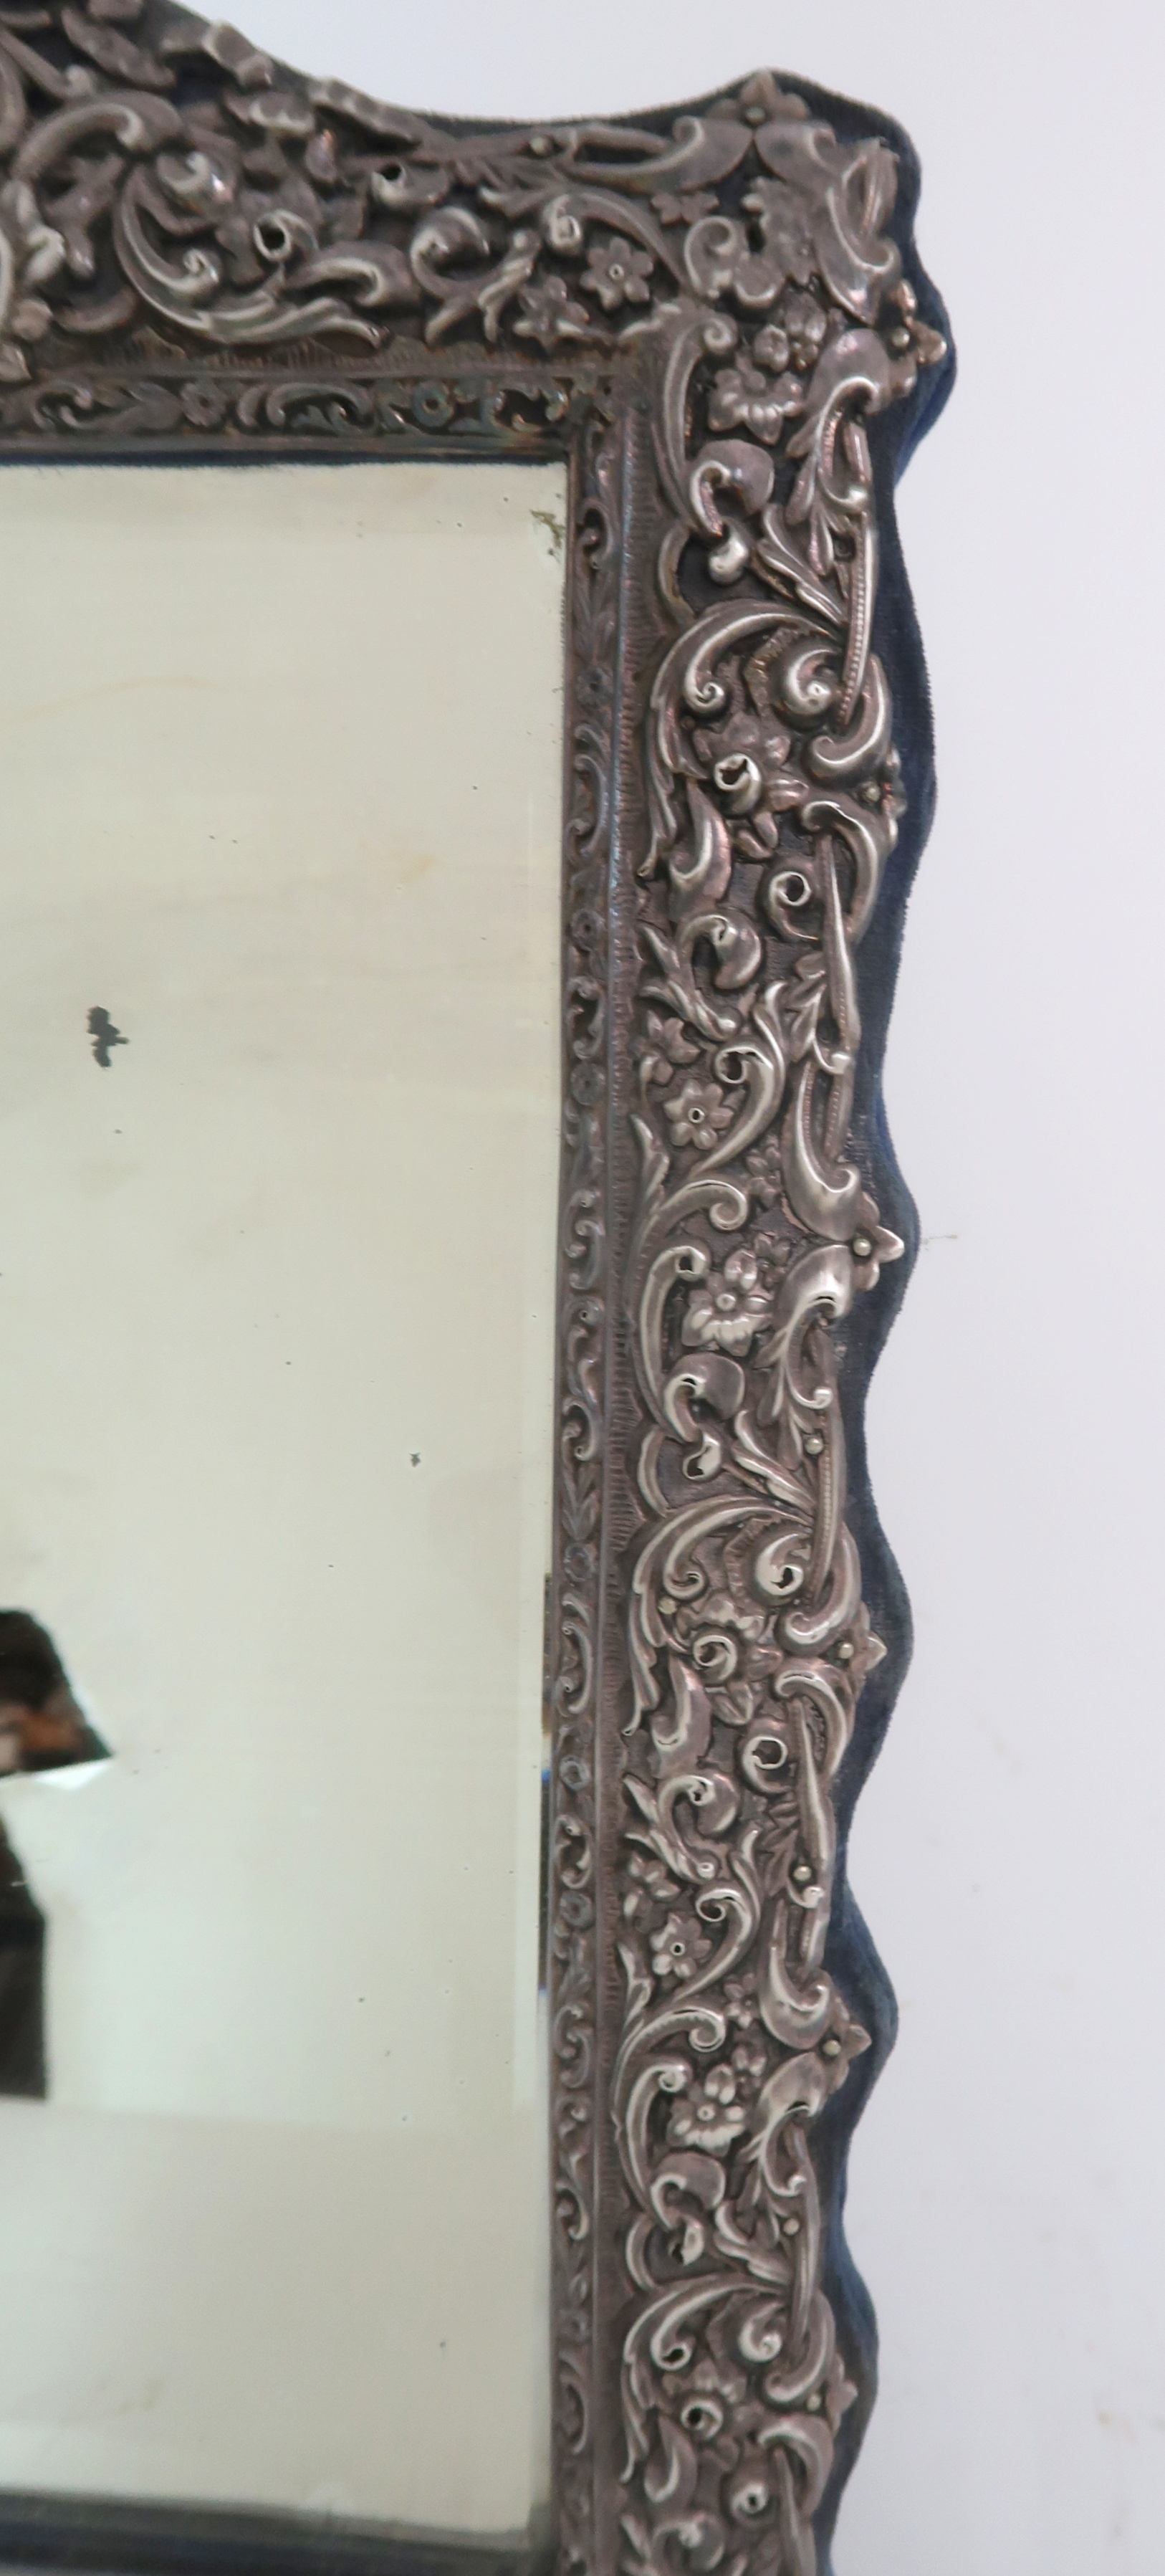 A LATE VICTORIAN SILVER-MOUNTED EASEL MIRROR with cartouche, monogrammed, CGB, Birmingham, 1900, - Image 3 of 5